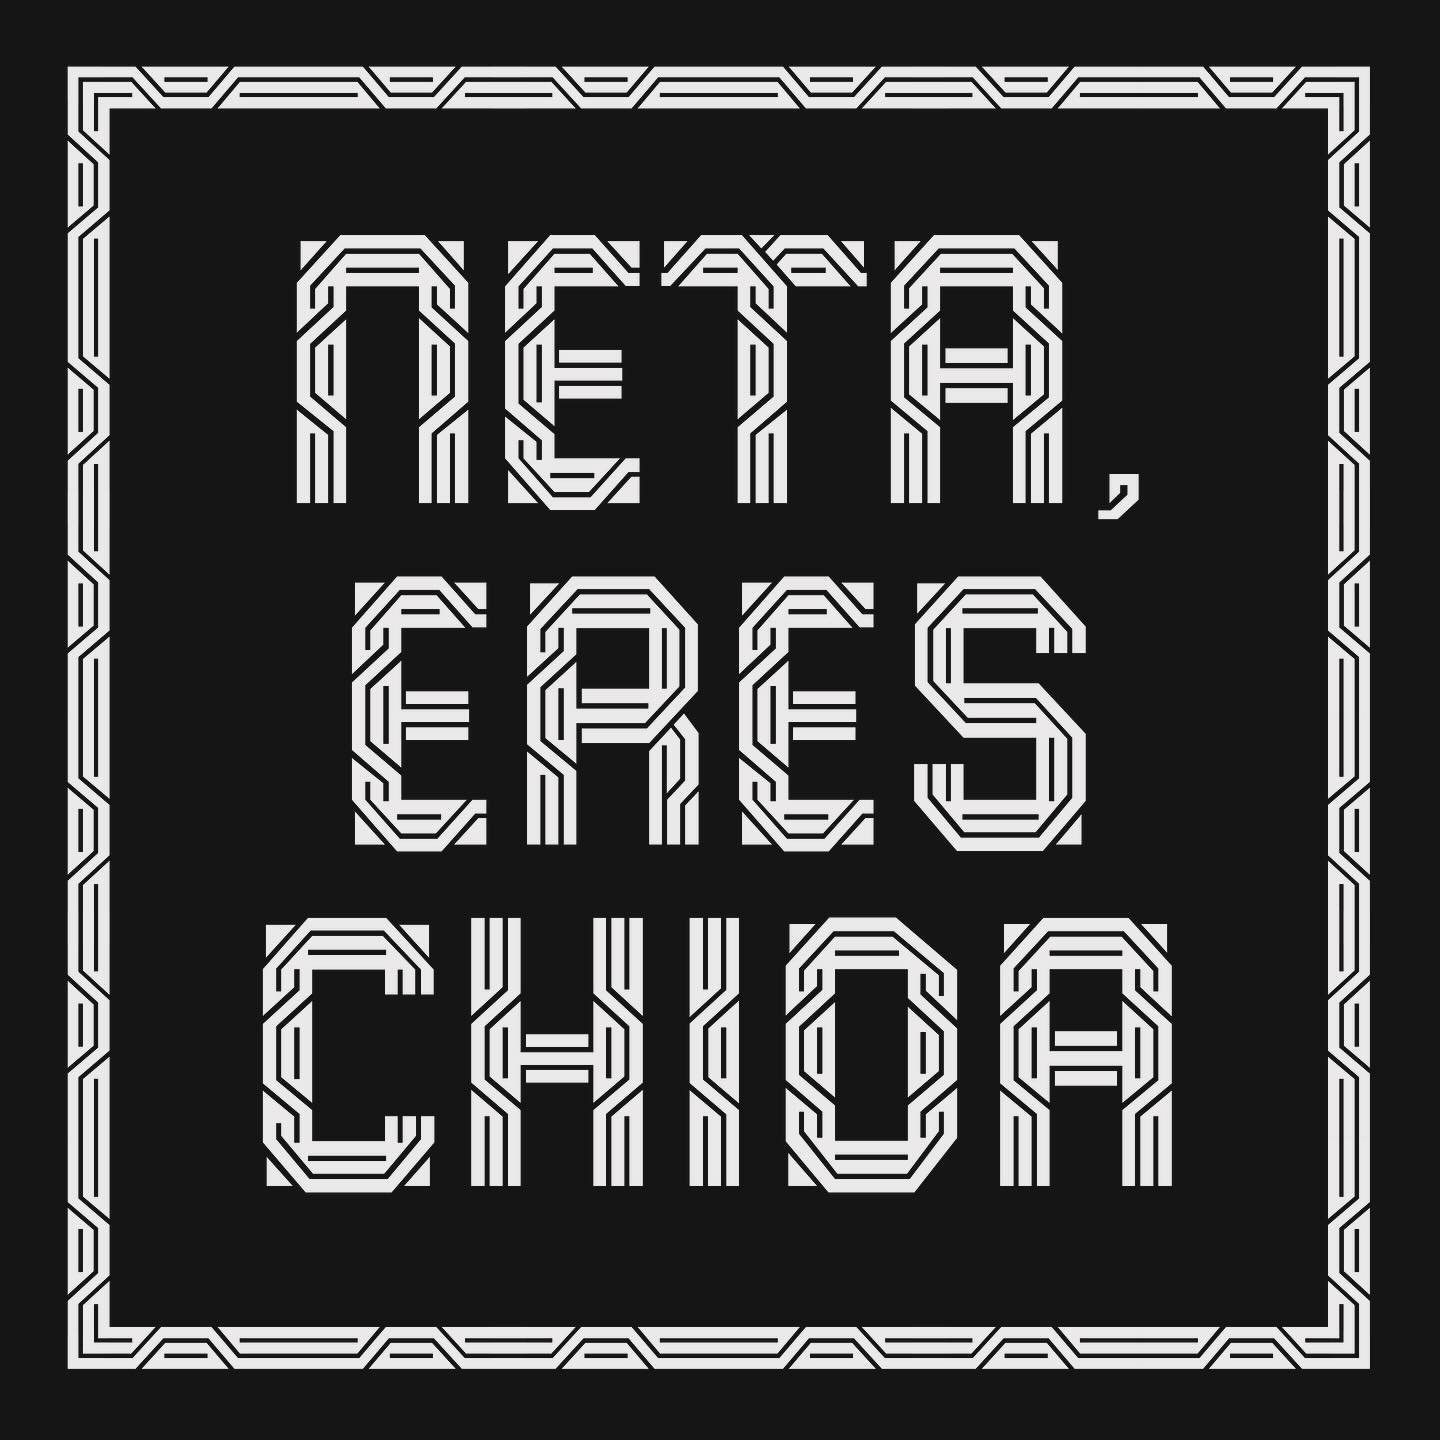 Whoever reads this, I want you to know&hellip; Eres bien chida! Eres bien chido!
.
I designed this typeface for a friend&rsquo;s taco truck idea, and it is one of my favorite designs I&rsquo;ve ever made. Right now, I&rsquo;ve only designed two font 